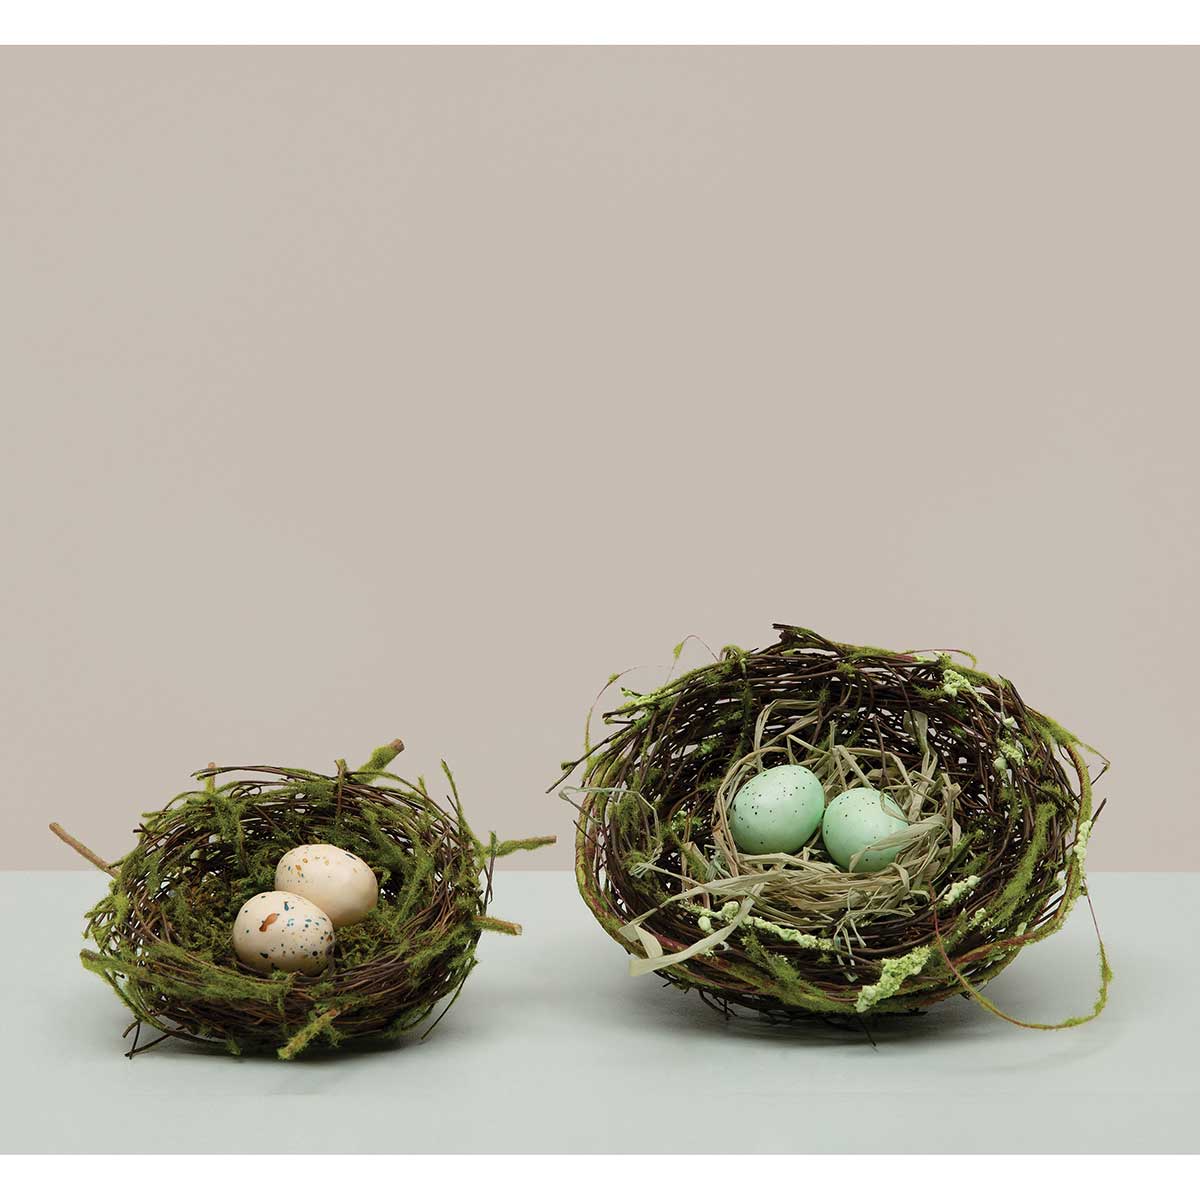 TWIG NEST WITH BLUE EGGS 6IN X 2.5IN TWIG/WOOD